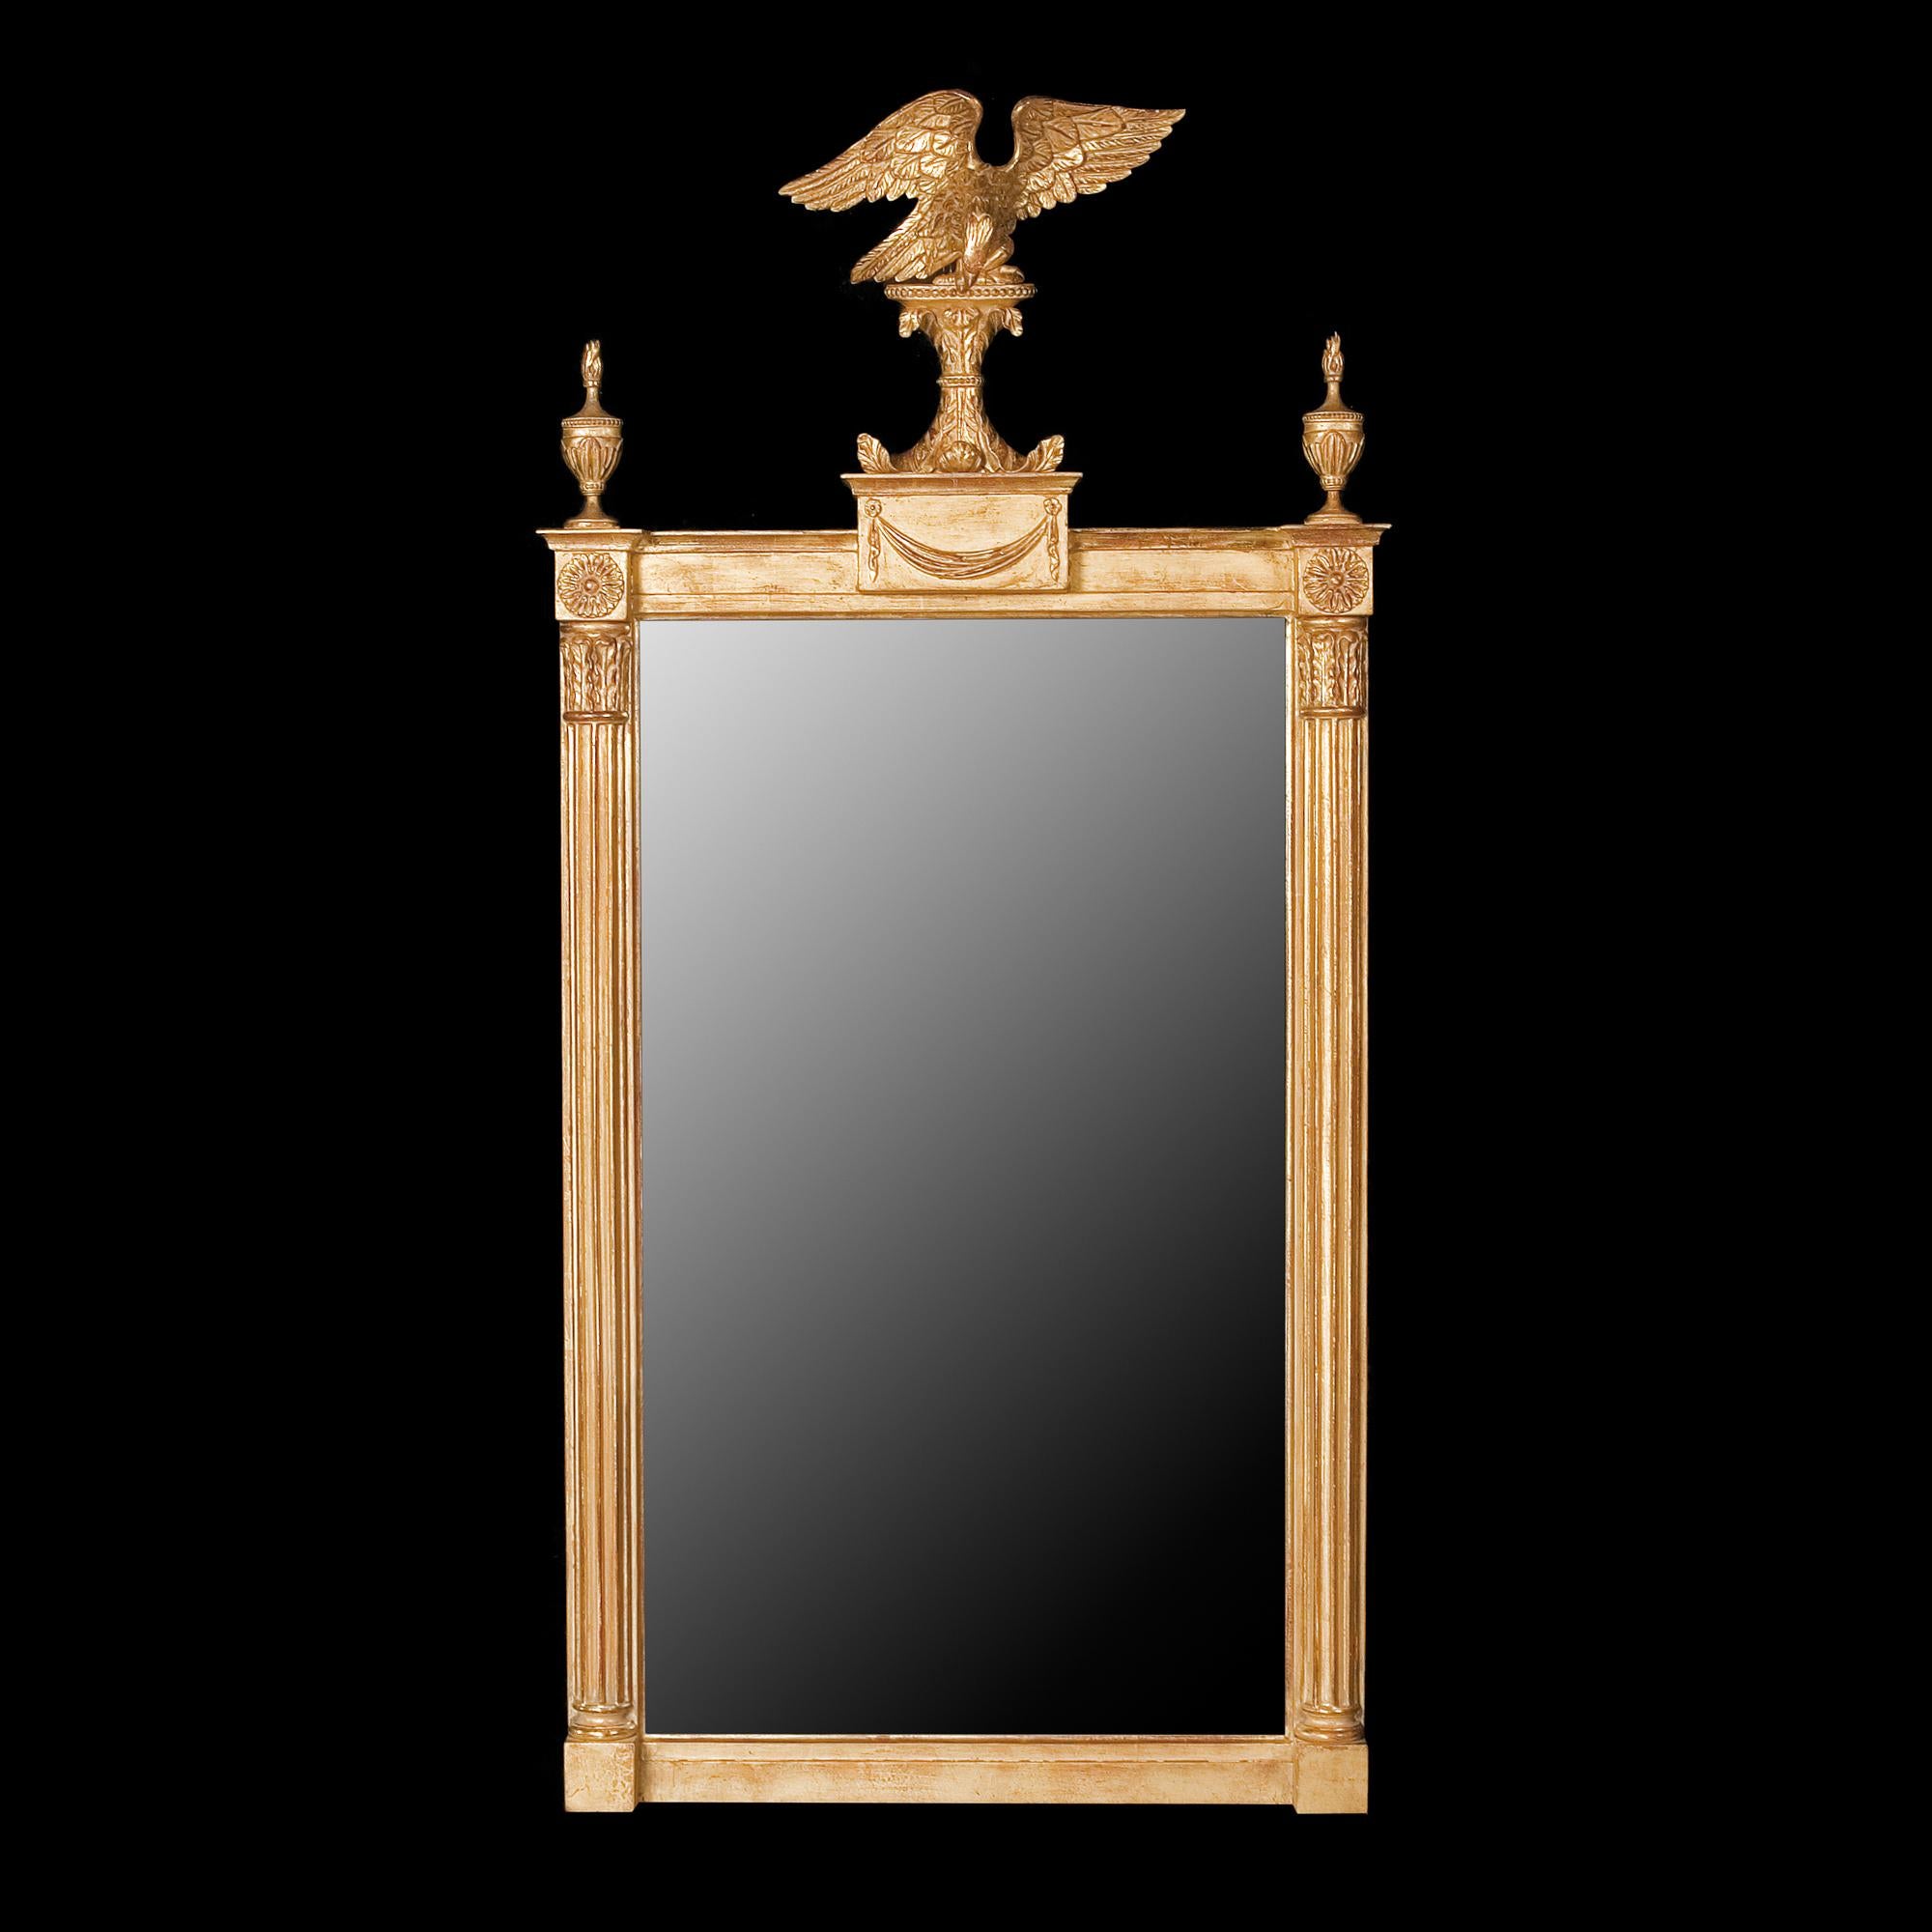 This rectangular pier mirror illustrates the transitional styles that bridge looking glass designs of the late 18th and early 19th Centuries. The mirror plate is set between classical columns with leaf carved capitals headed by paterae and leaf